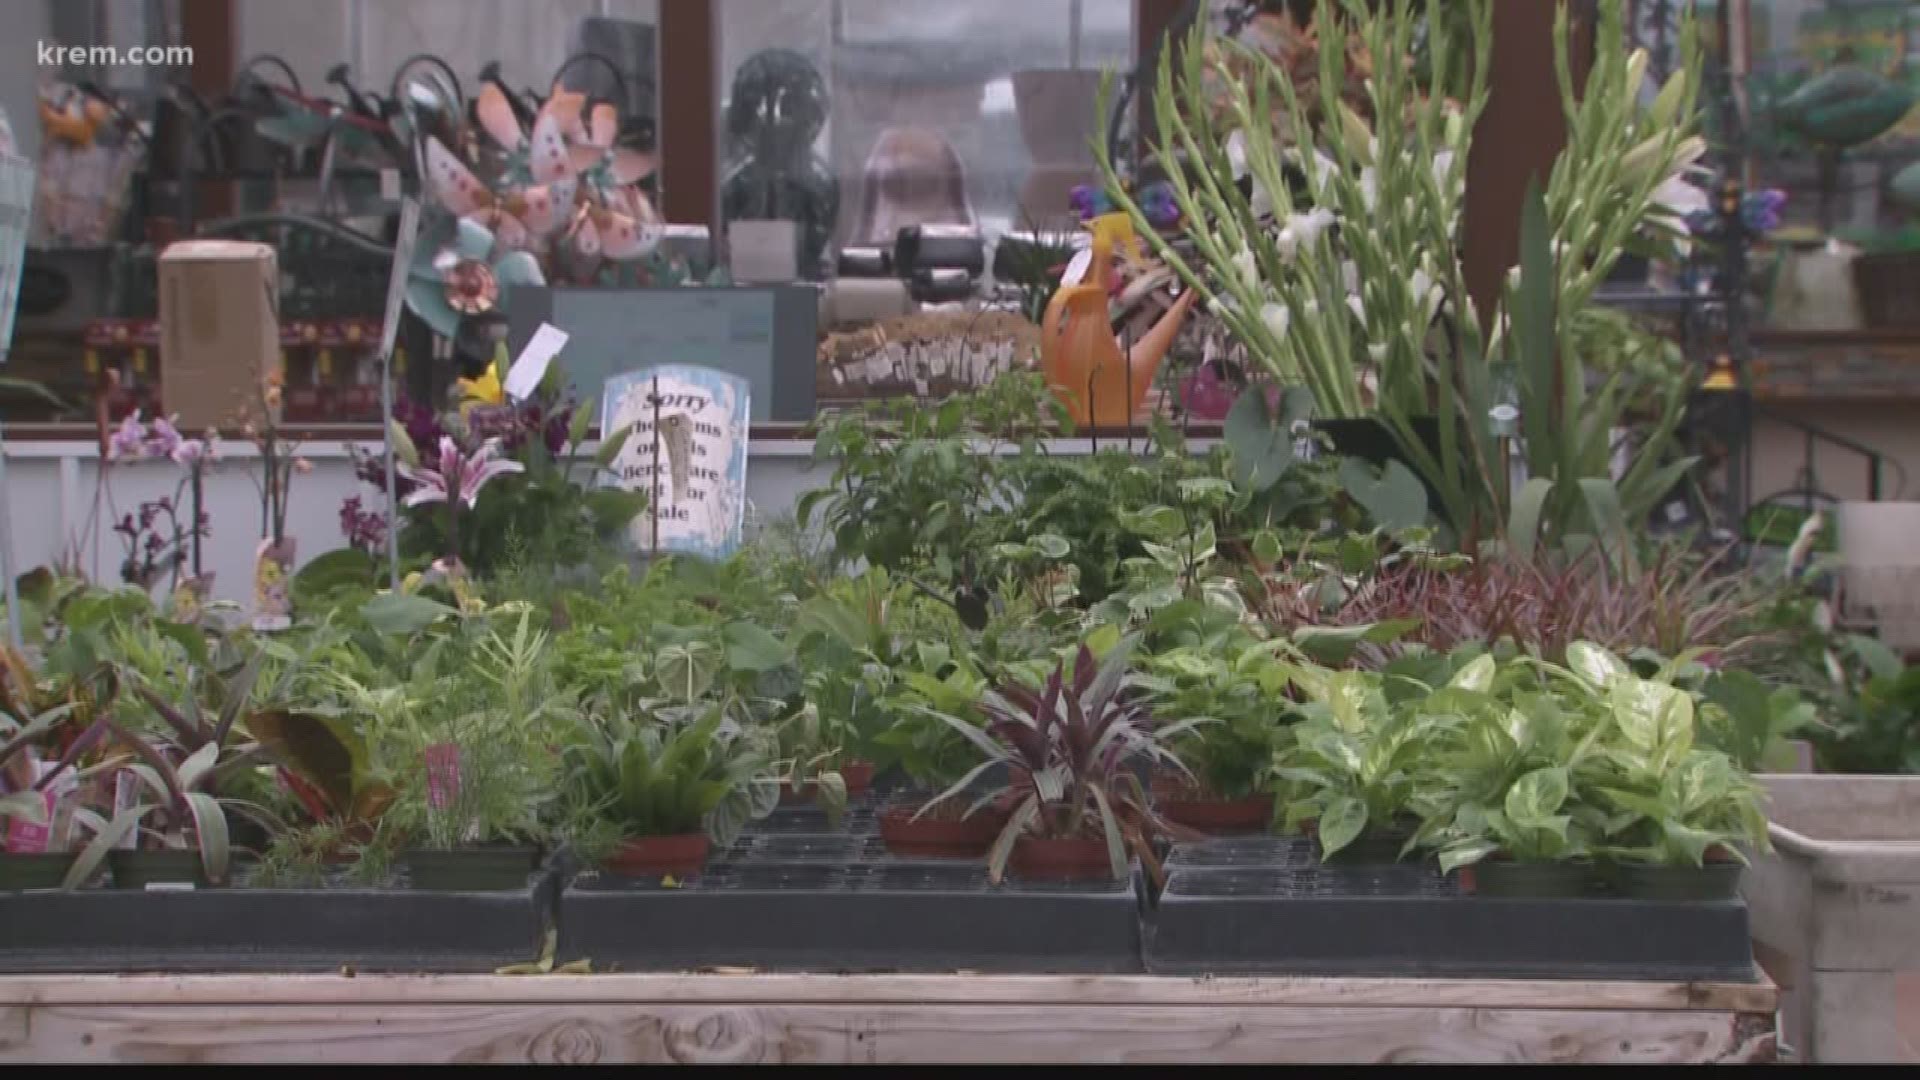 KREM Reporter Taylor Viydo spoke with the Spokane County Master Gardeners about some do's and don'ts for early spring gardening.